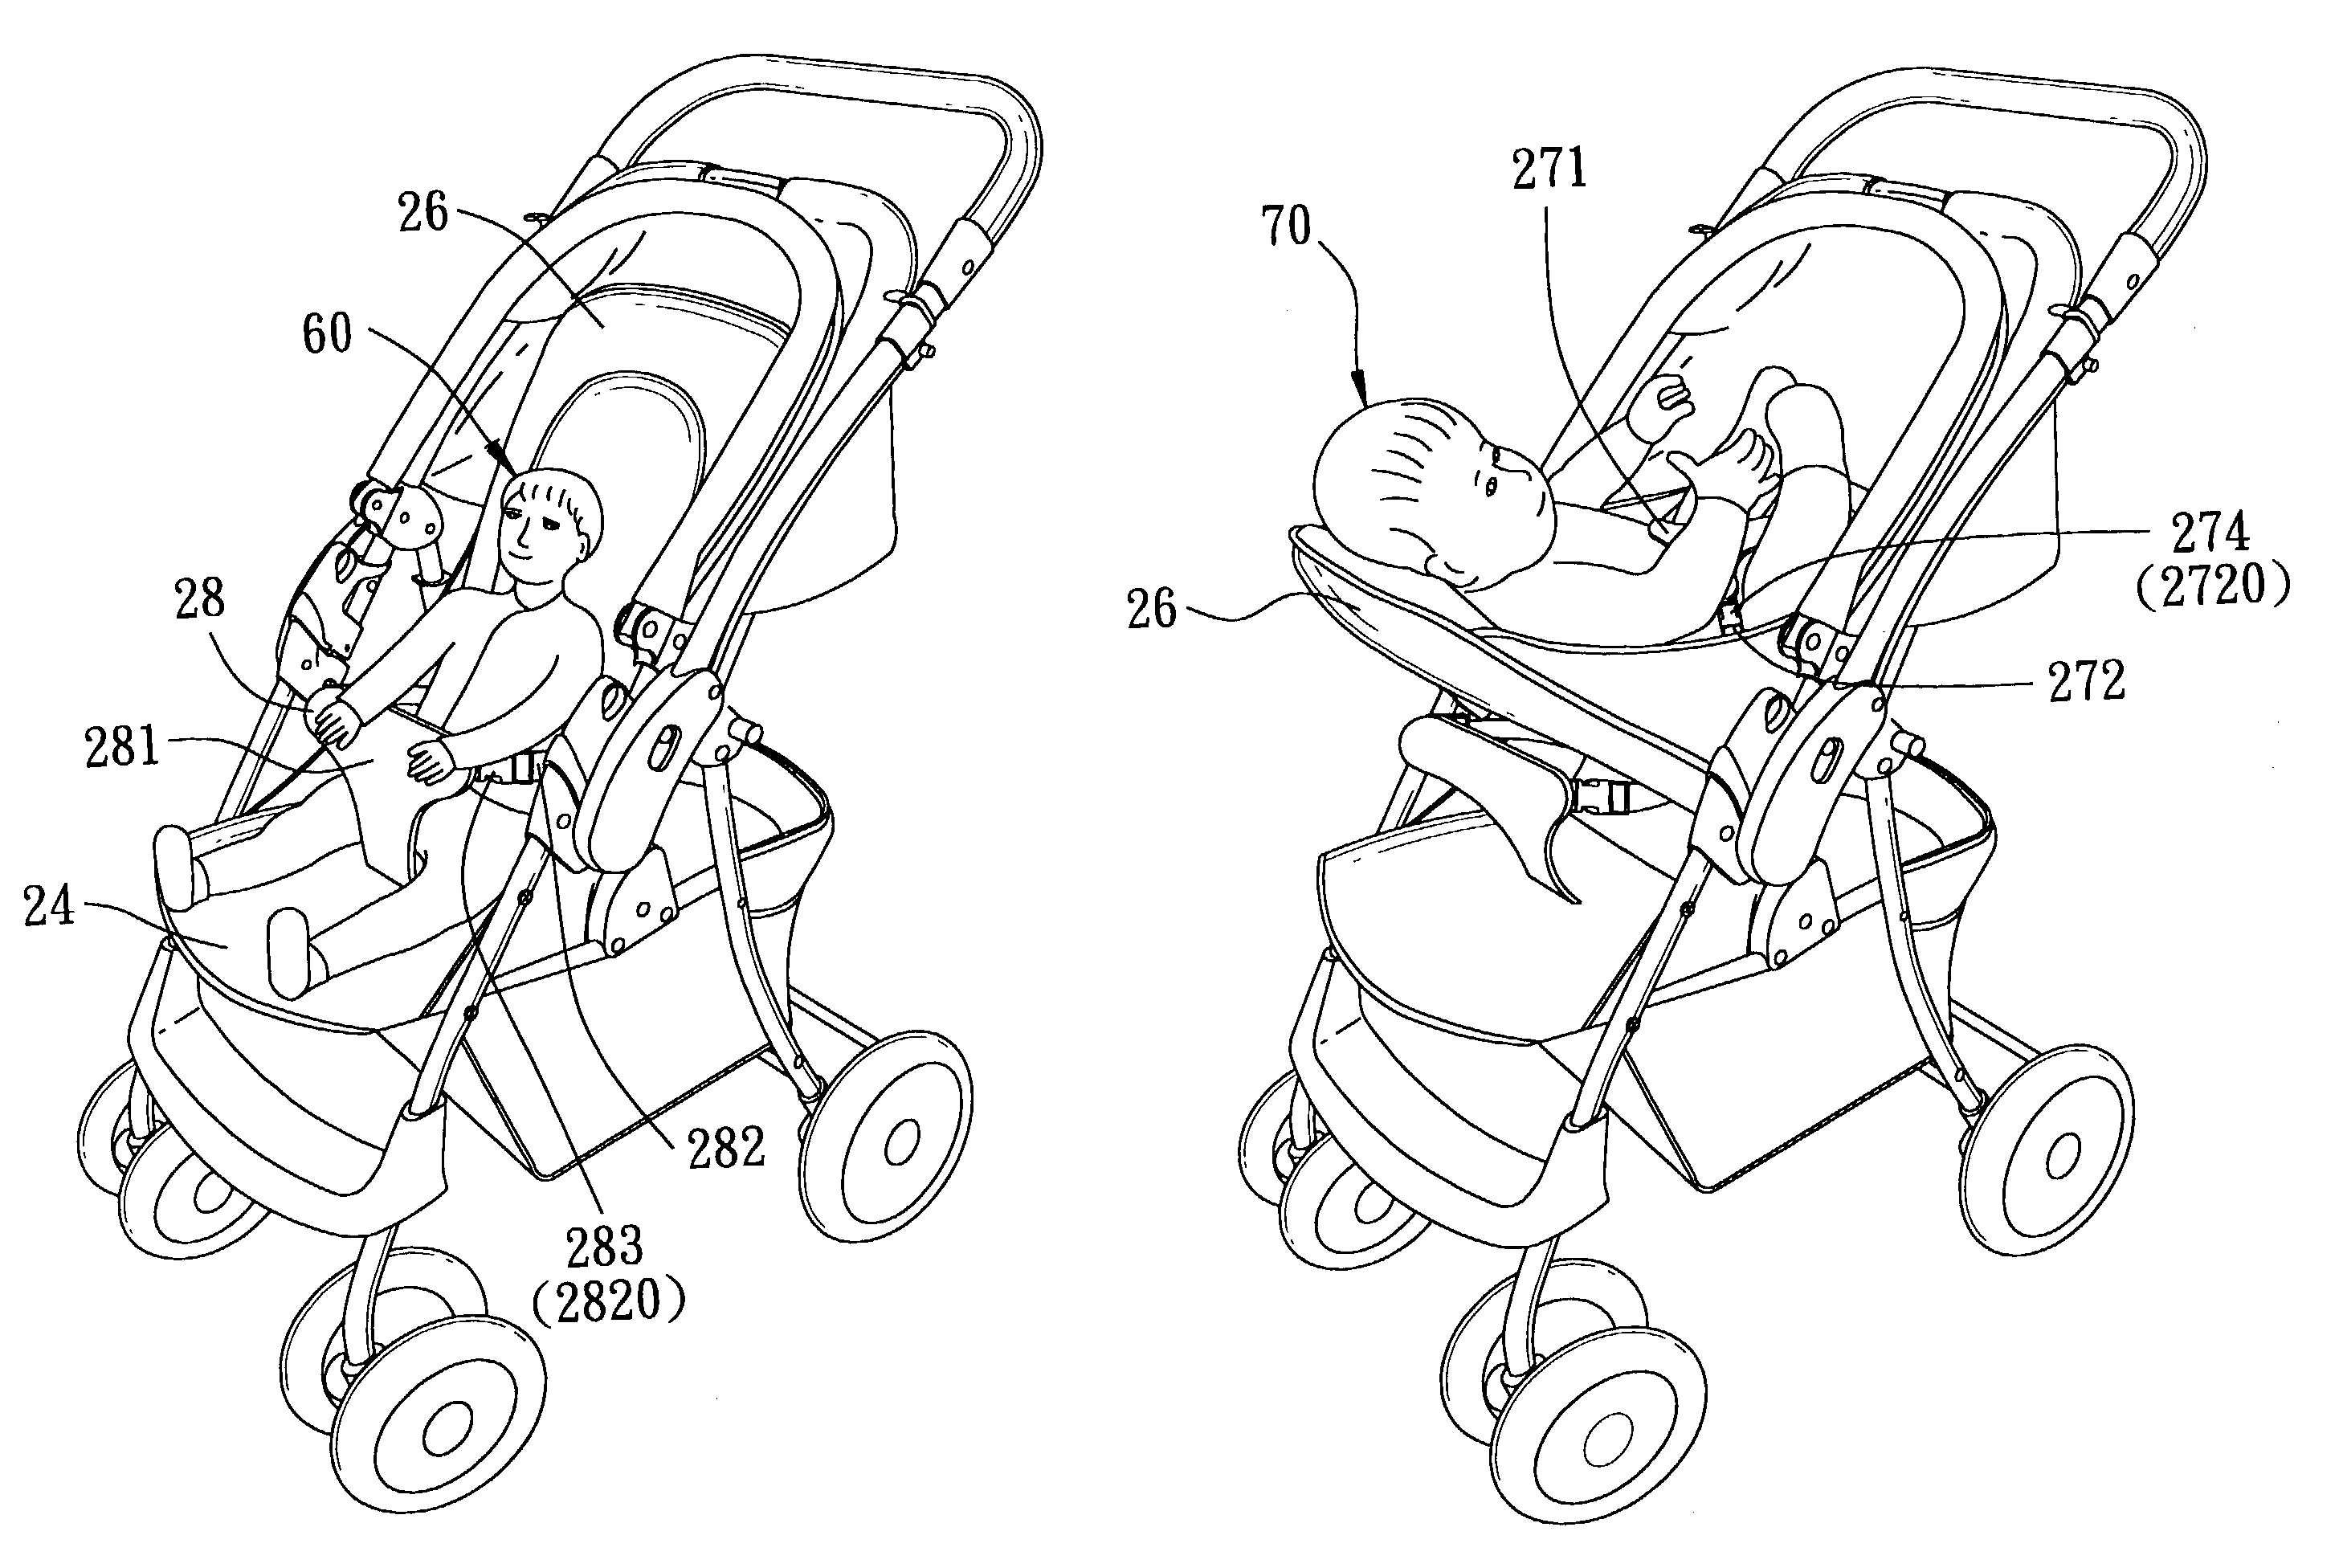 Stroller suitable for seating and reclining of a baby